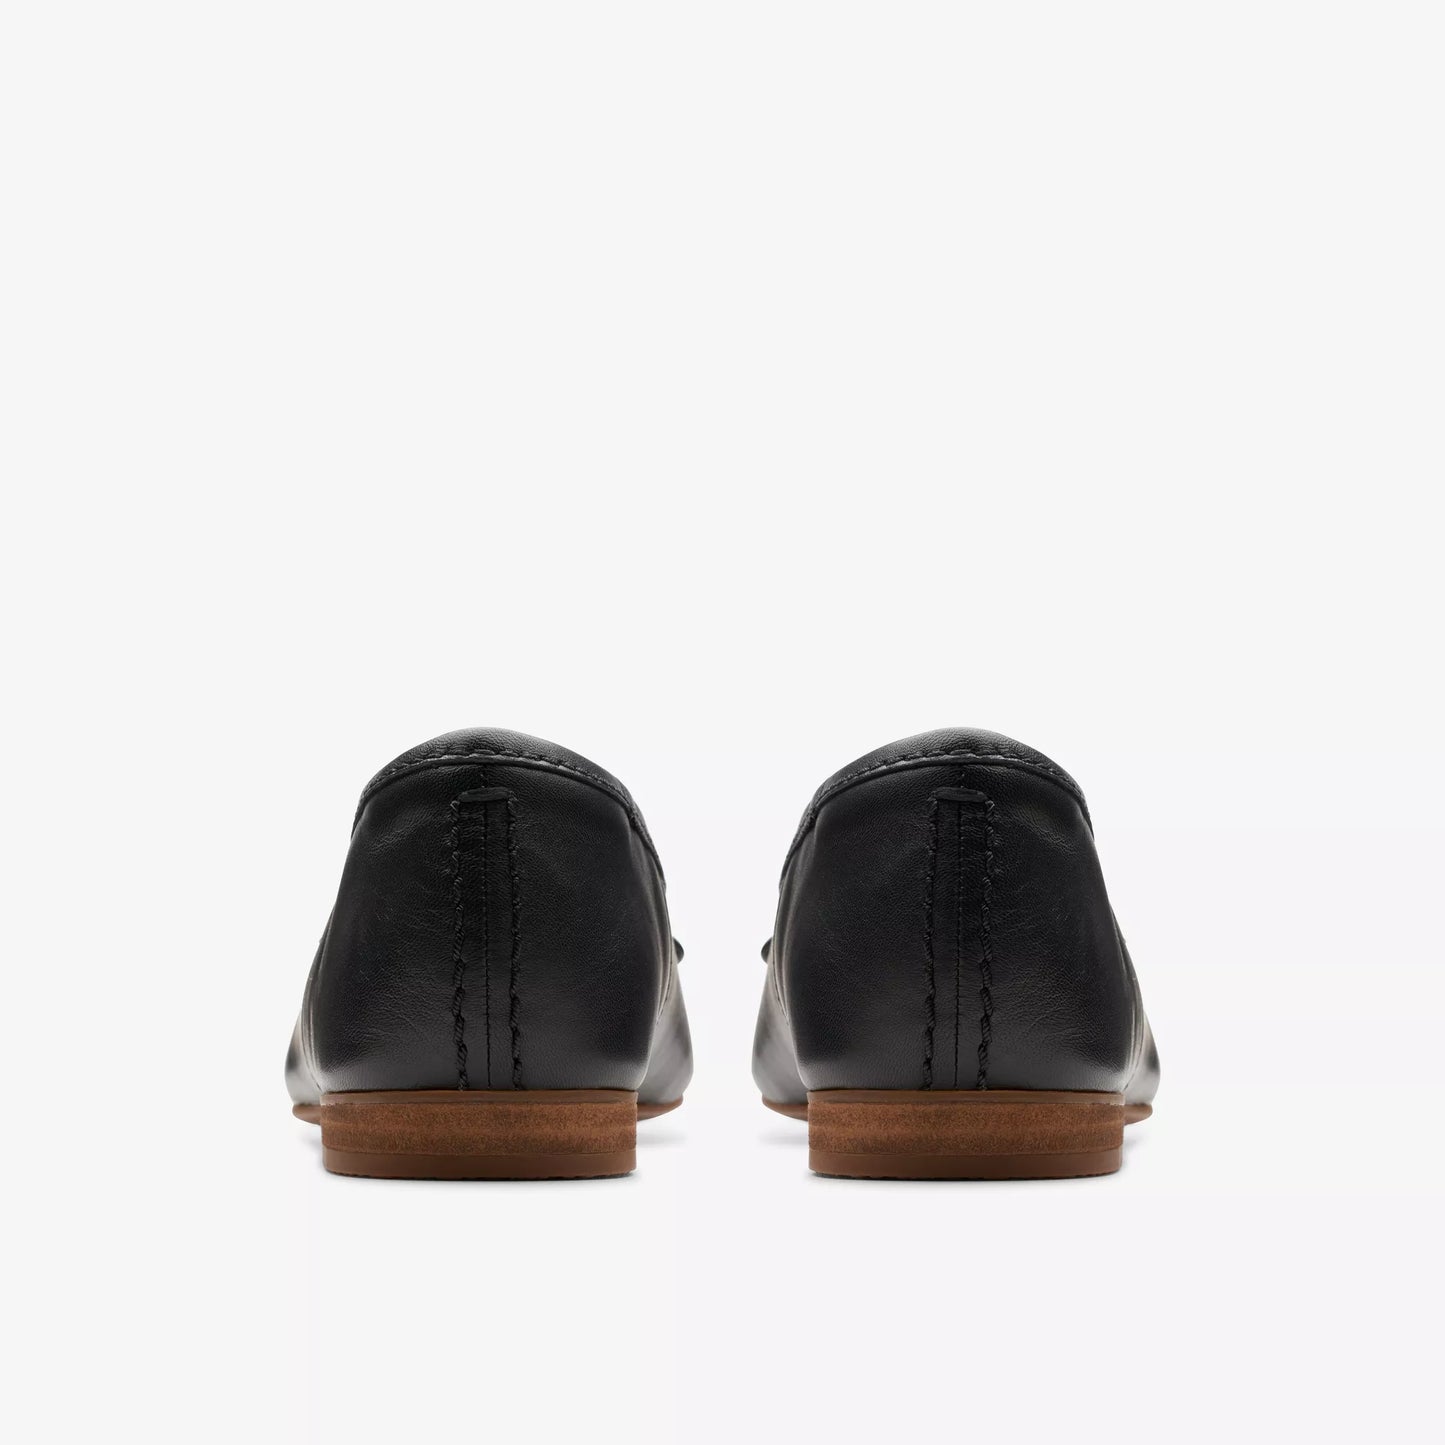 Back view of the Clarks Black Leather Fawna Lily Ballet Shoe